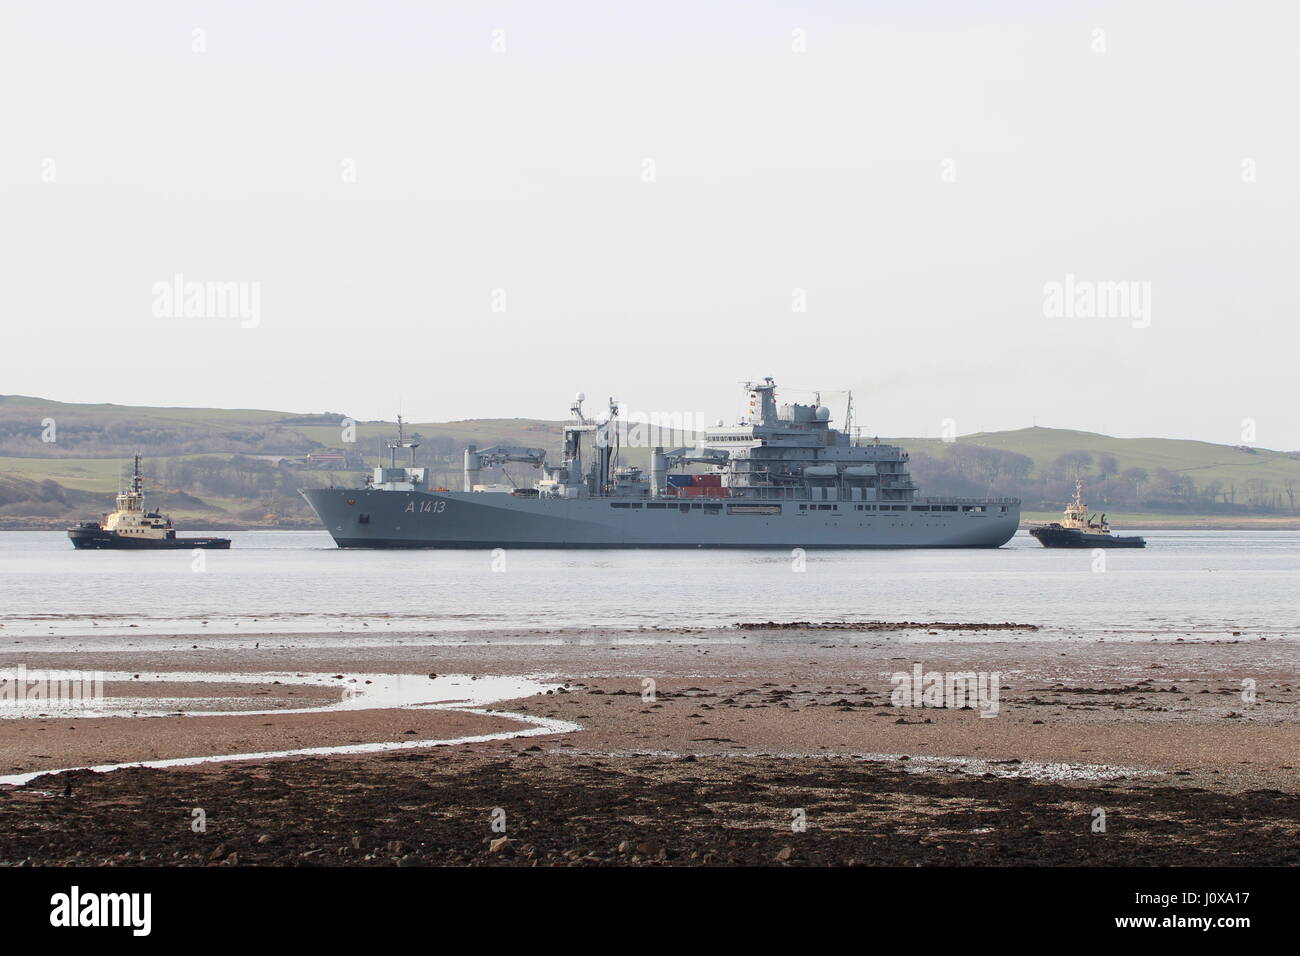 FGS Bonn (A1413), a Berlin-class replenishment vessel of the German Navy, being escorted into Hunterston during Exercise Joint Warrior 17-1. Stock Photo